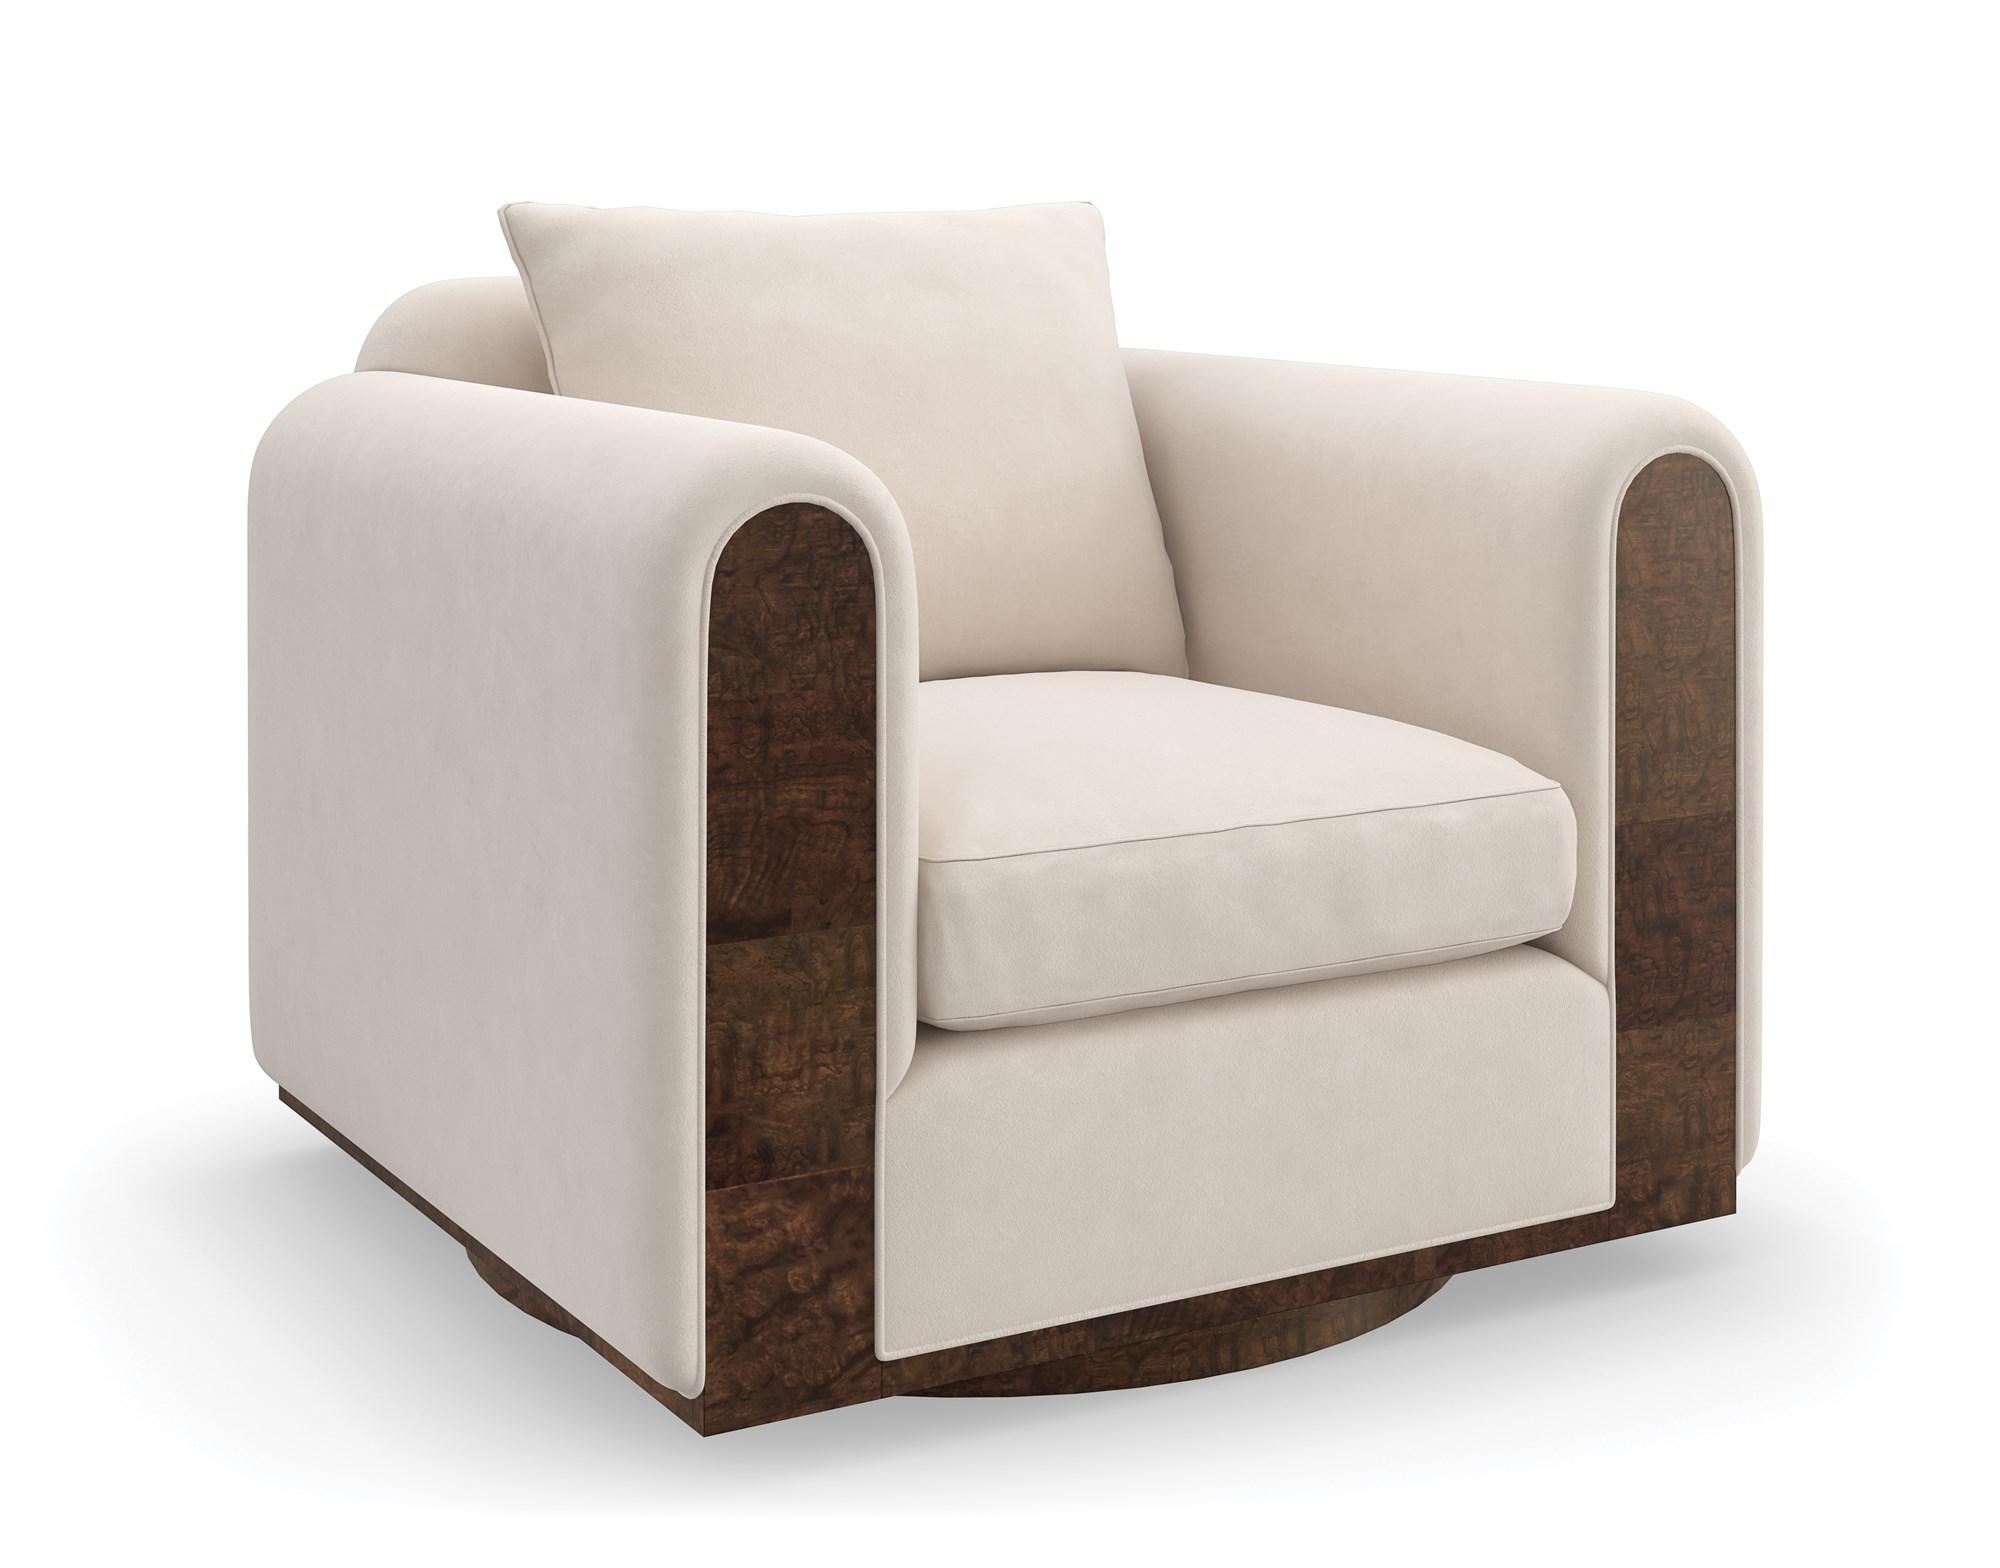 Contemporary Armchair DIMITRI CHAIR UPH-022-031-A in Cream, Brown Fabric